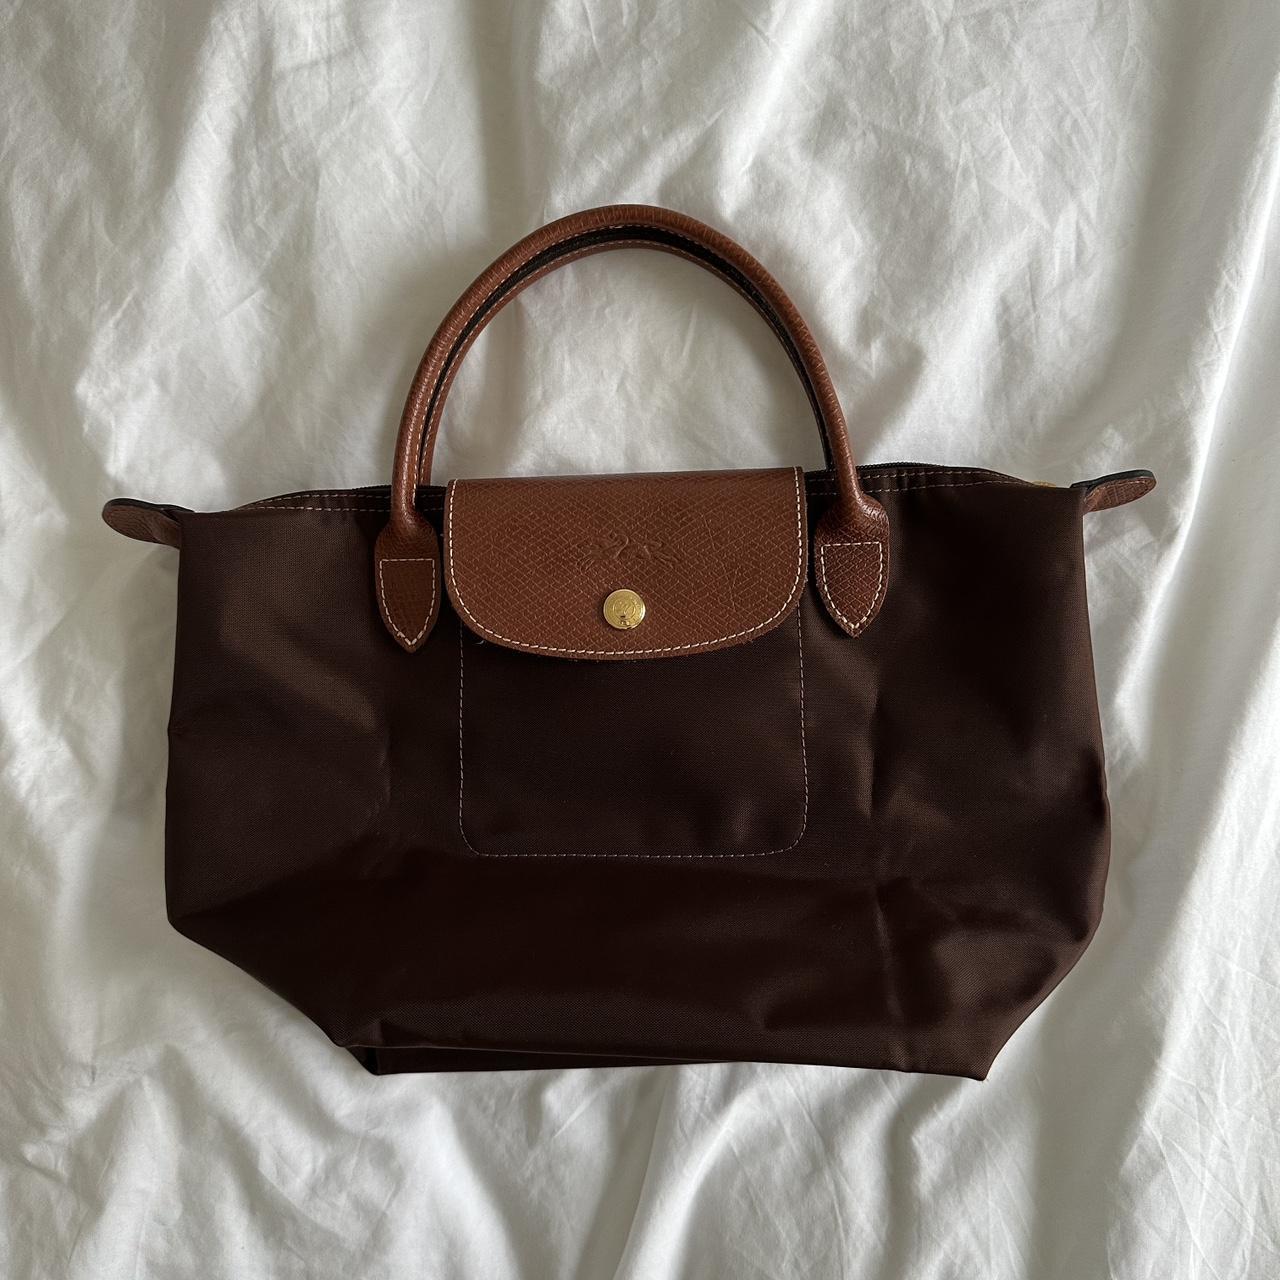 New Longchamp pliage S in chocolate brown - Depop